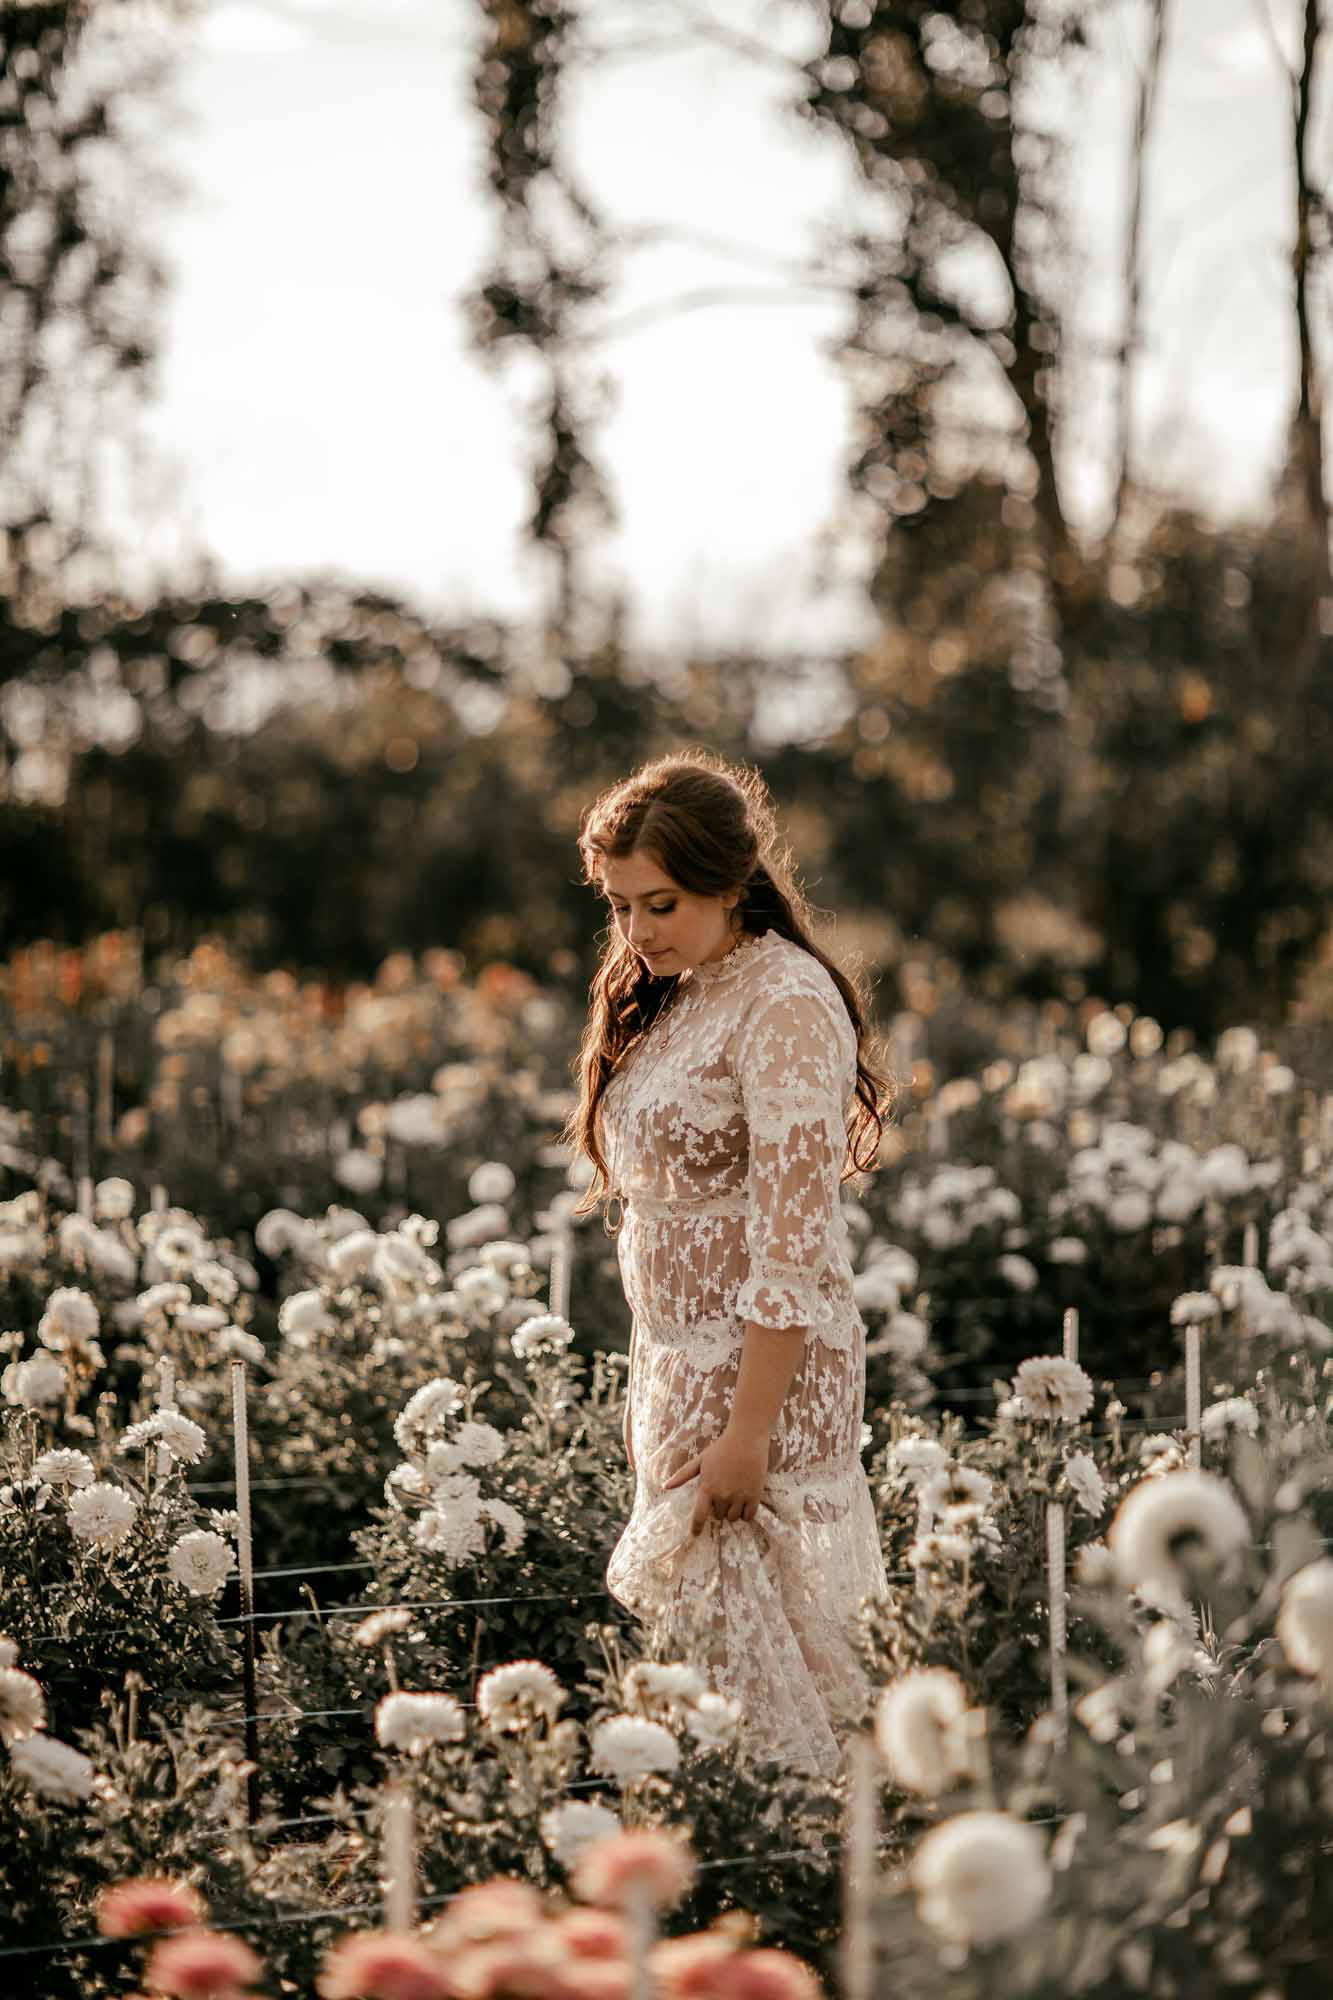 This dreamy styled shoot on an organic flower farm was designed to celebrate LGBTQ+ acceptance | Honey and Lux Photography | Featured on Equally Wed, the leading LGBTQ+ wedding magazine